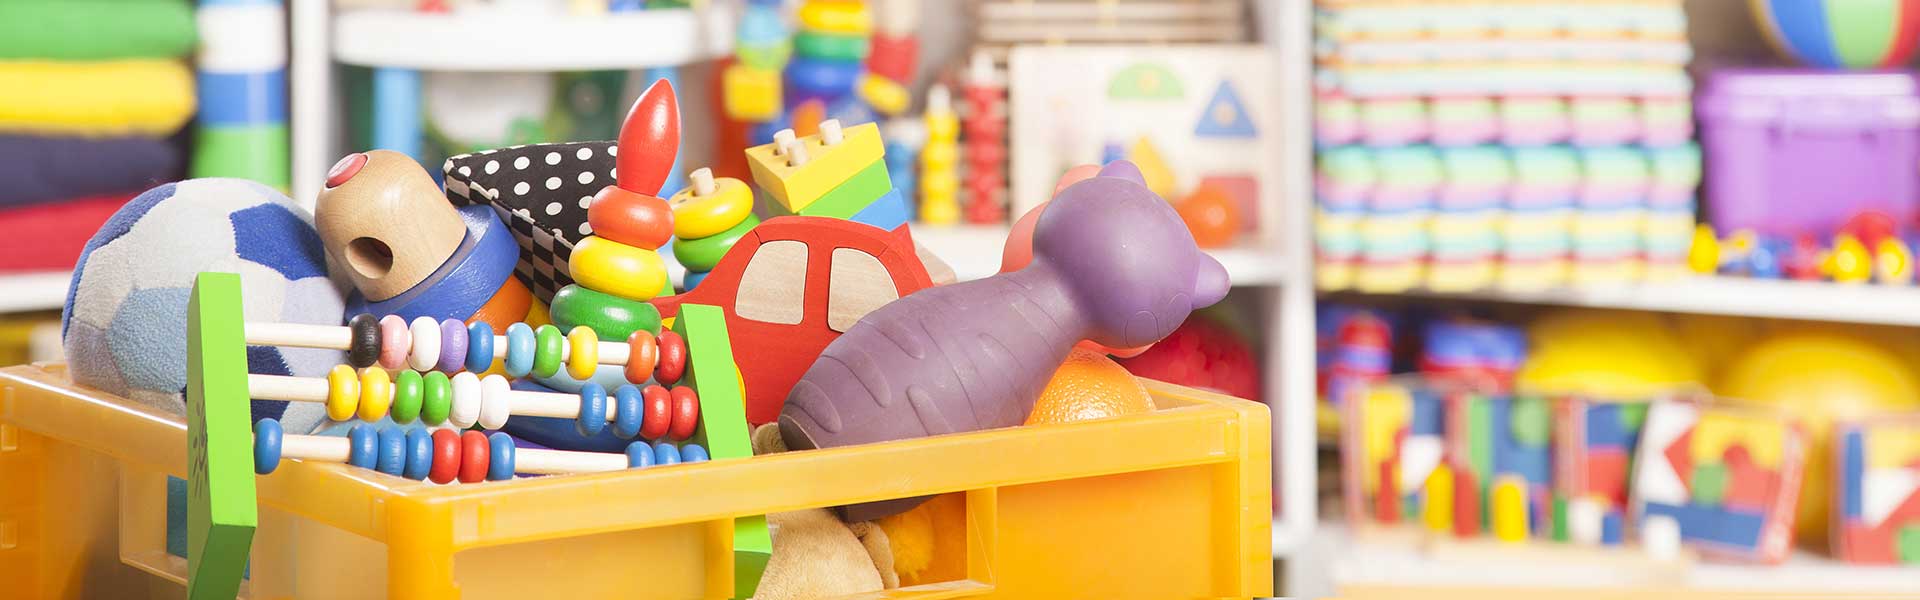 Unsafe Toys: What You Need to Know